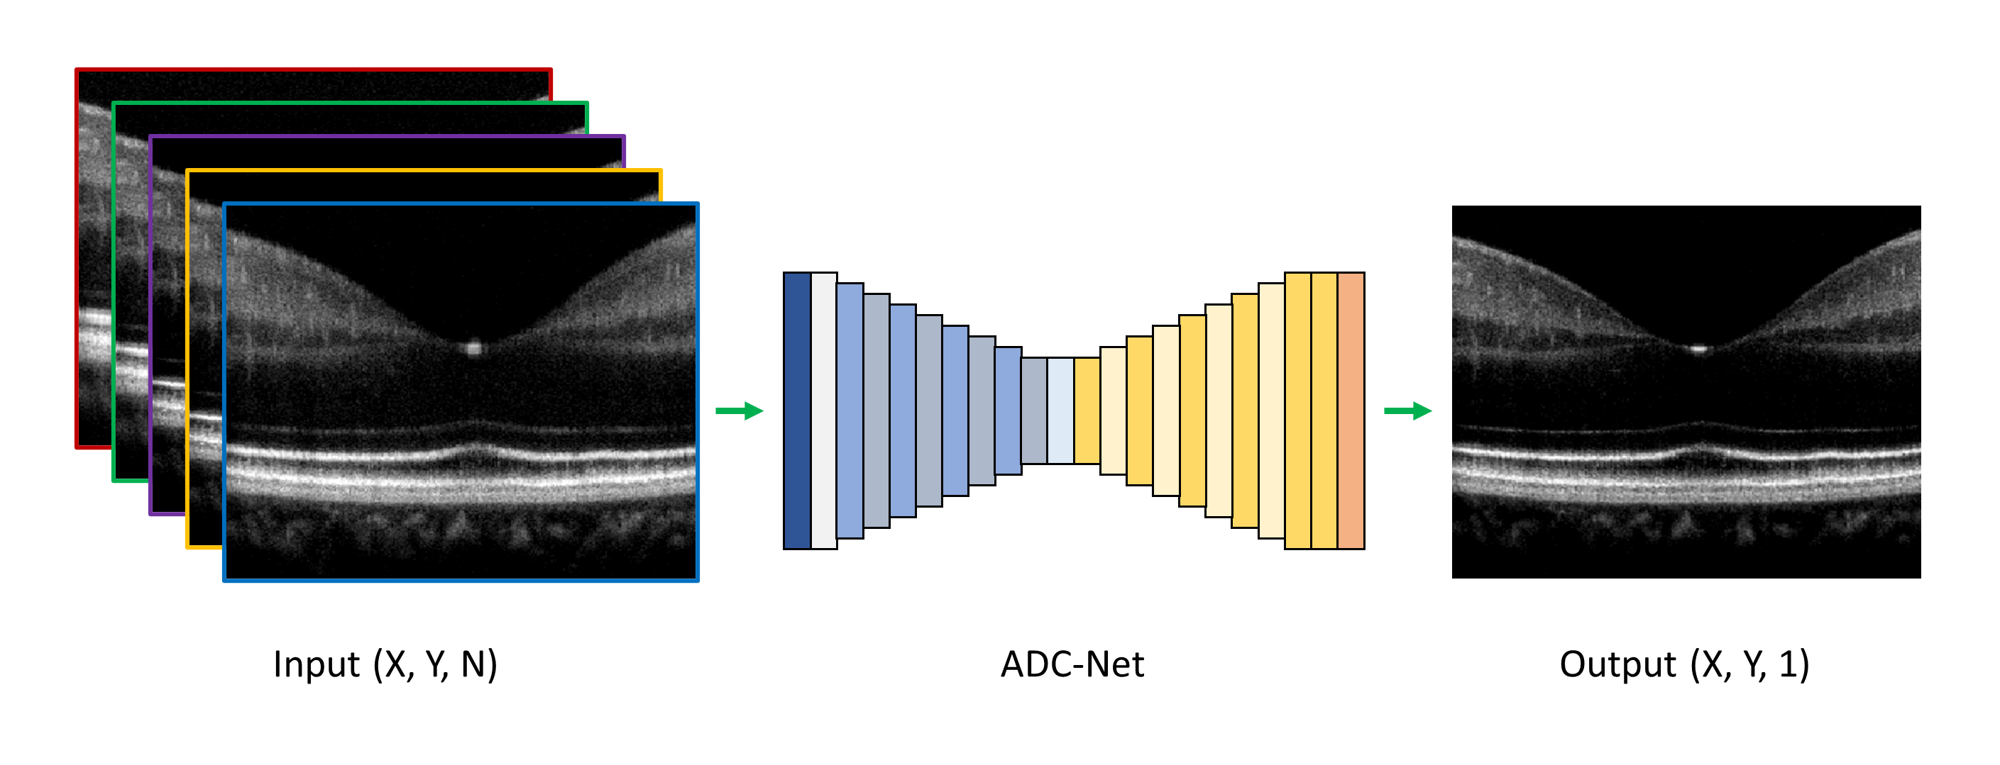 The input in ADCNet is an array of size (X,Y,N), where N is the number of partially dipersion comepensated OCT B-scans, the output of ADCNet is a single fully dipersion compensated OCT B-scan.